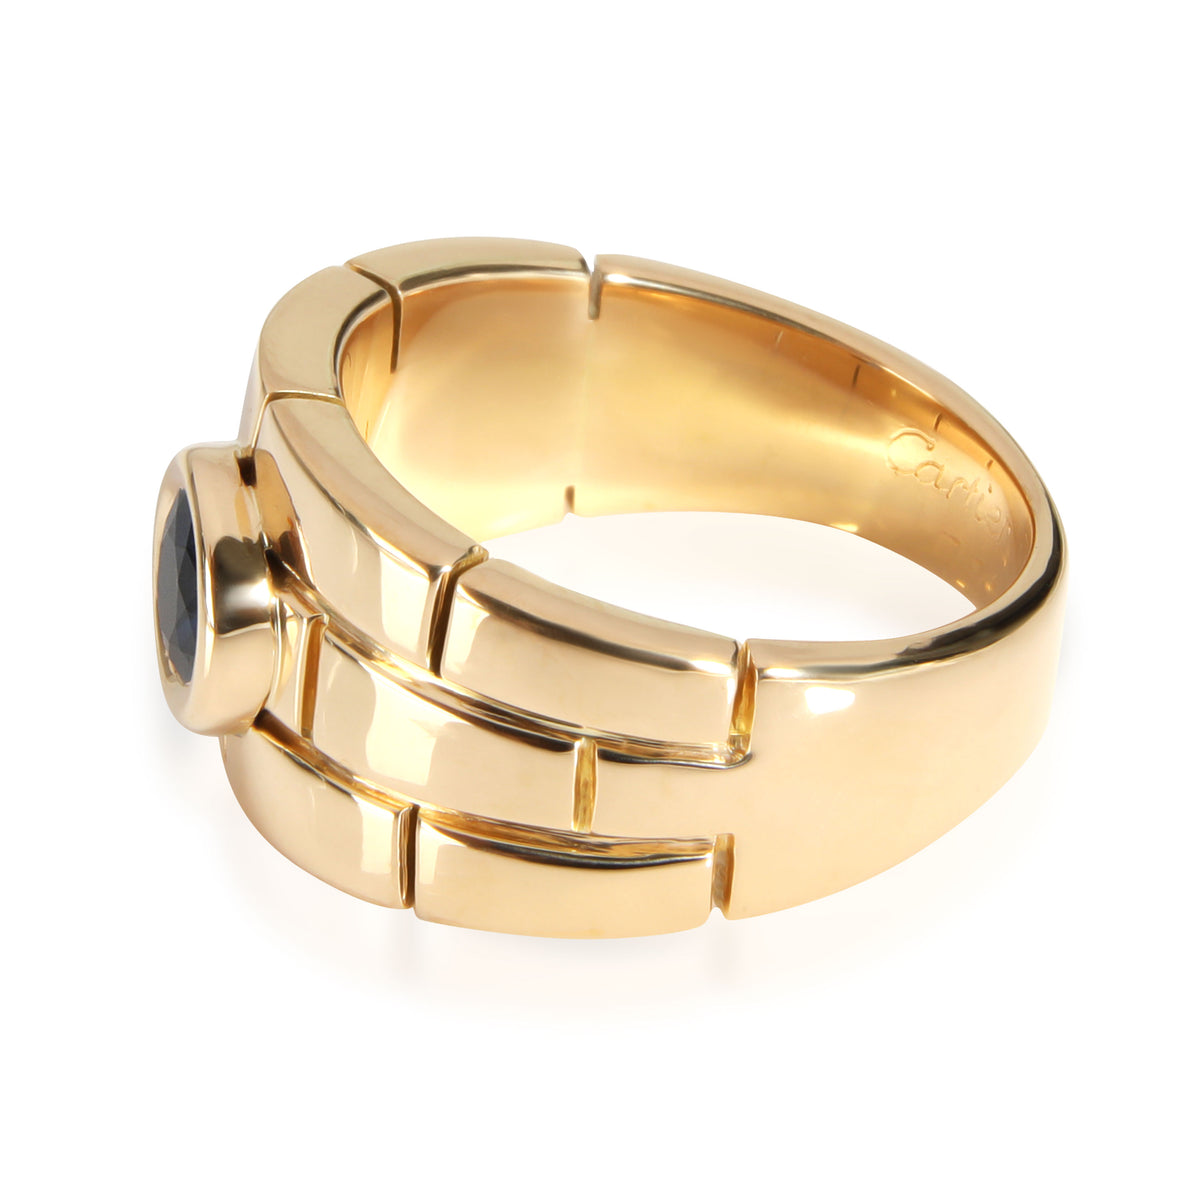 Cartier Panthere Sapphire Ring in 18K Yellow Gold